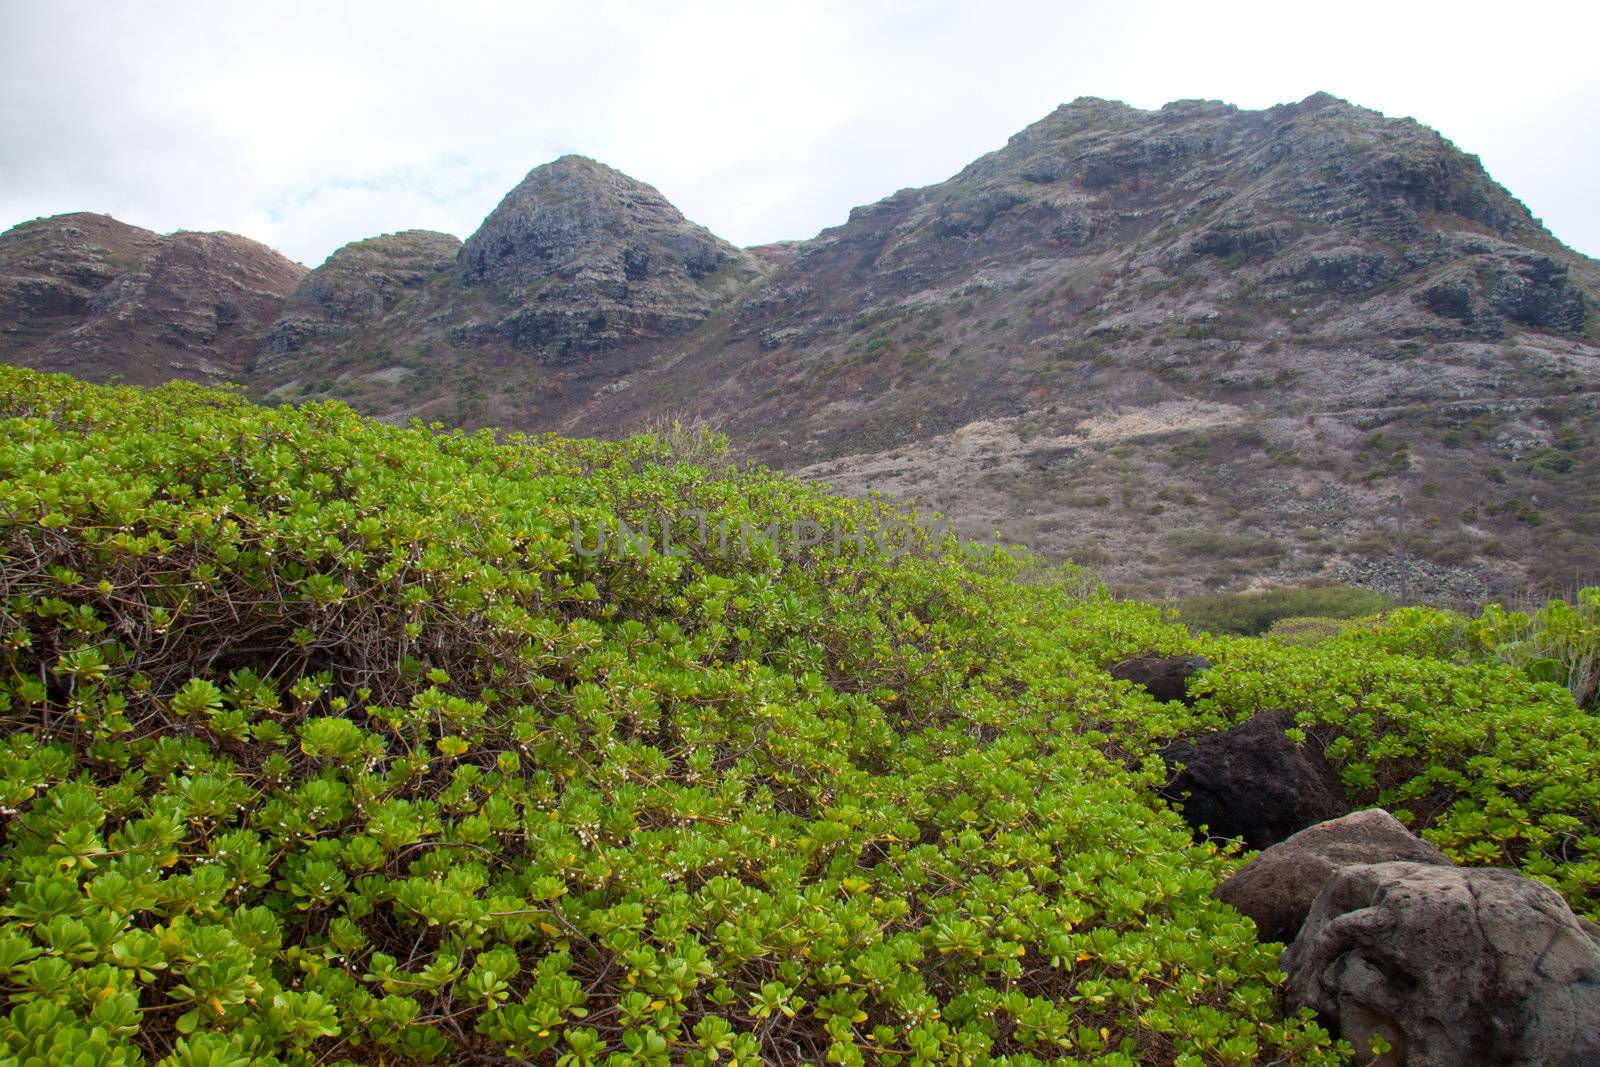 Vibrant green plants contrast against the dark drab colors of the mountains behind them in oahu hawaii.